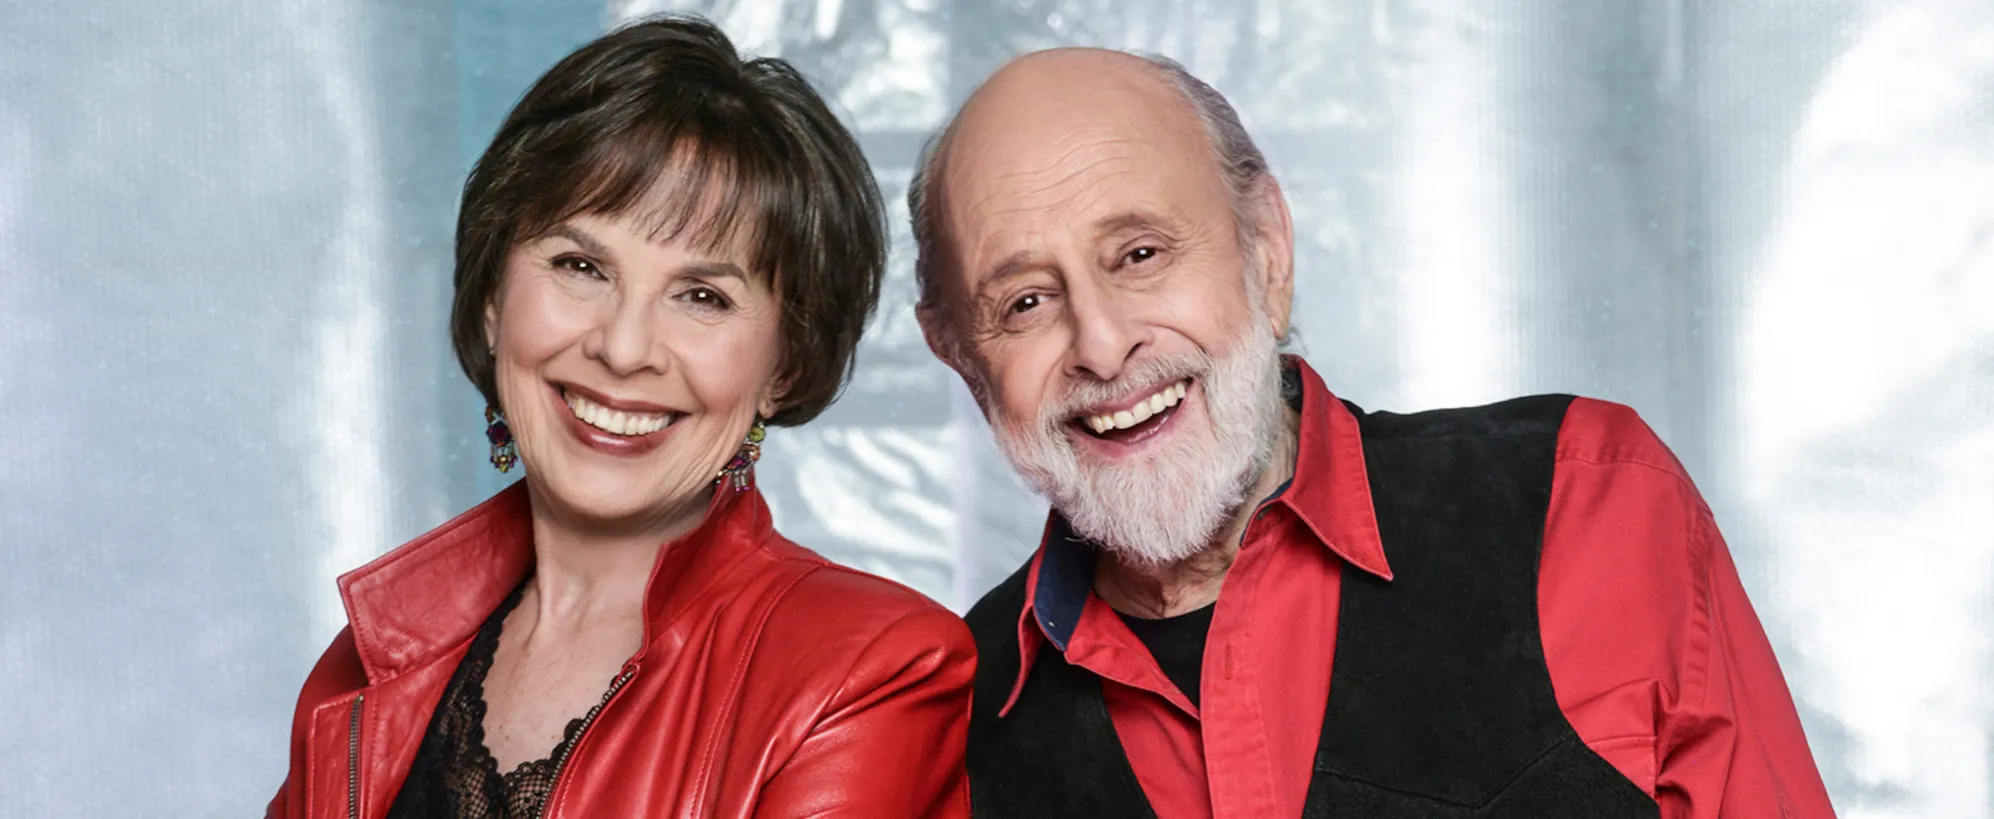 Relive the Music of Sharon, Lois, and Bram with the Trio’s New Live LP